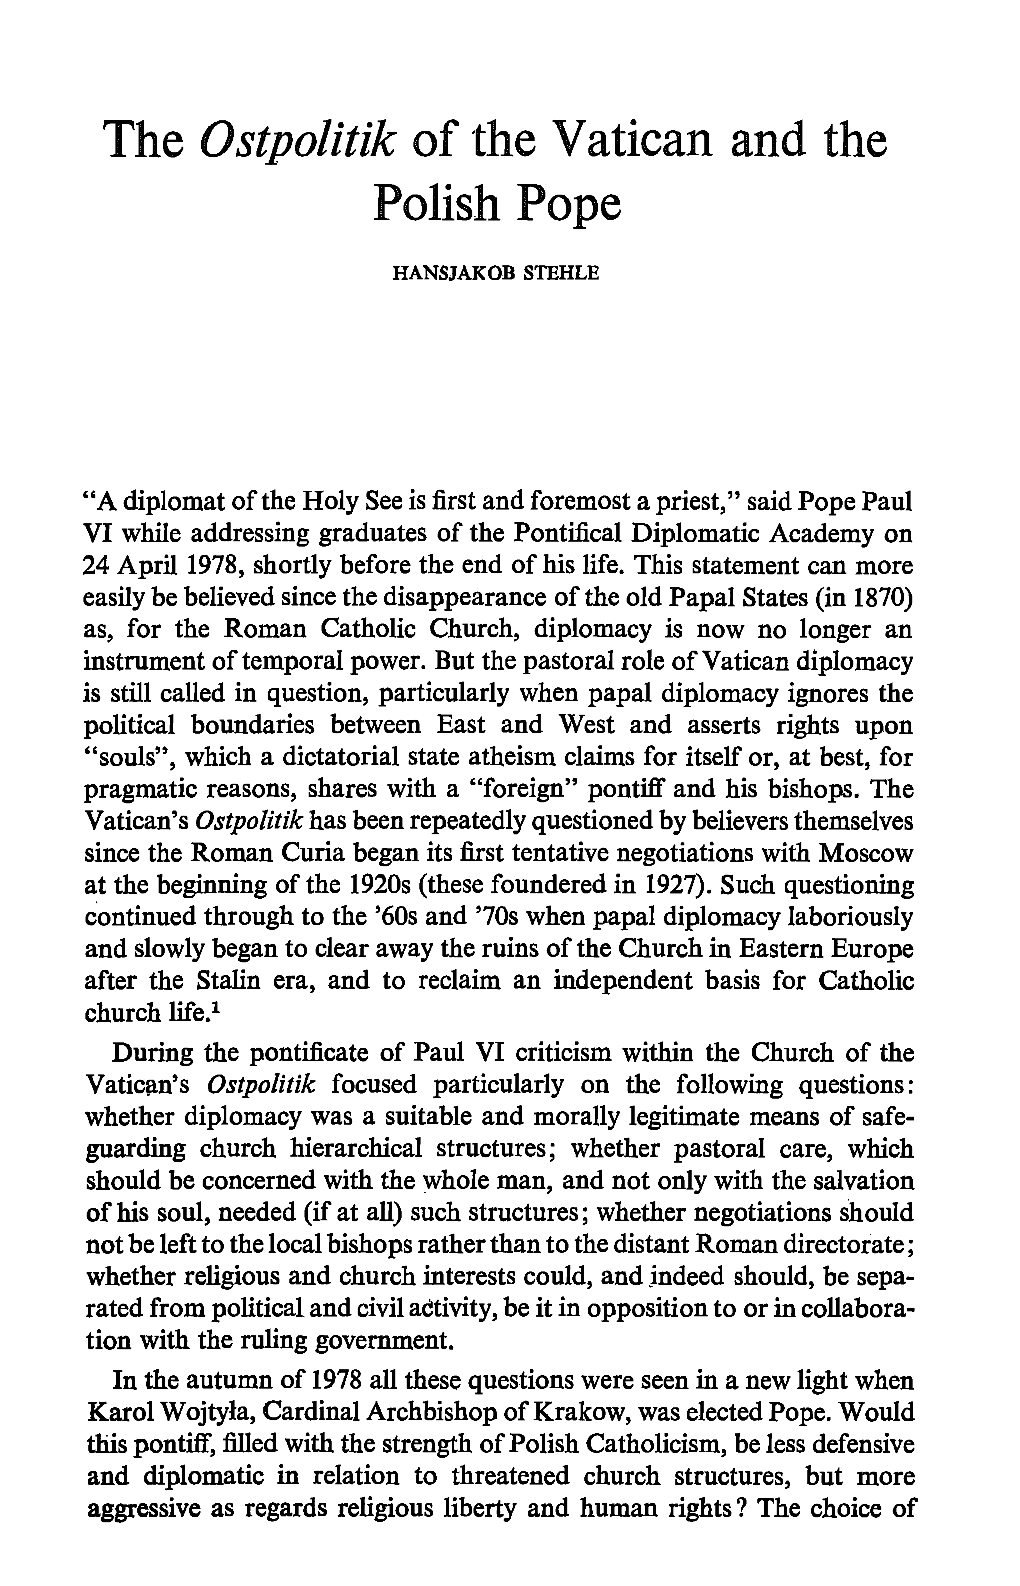 Hansjakob Stehle, "The Ostpolitik of the Vatican and the Polish Pope,"